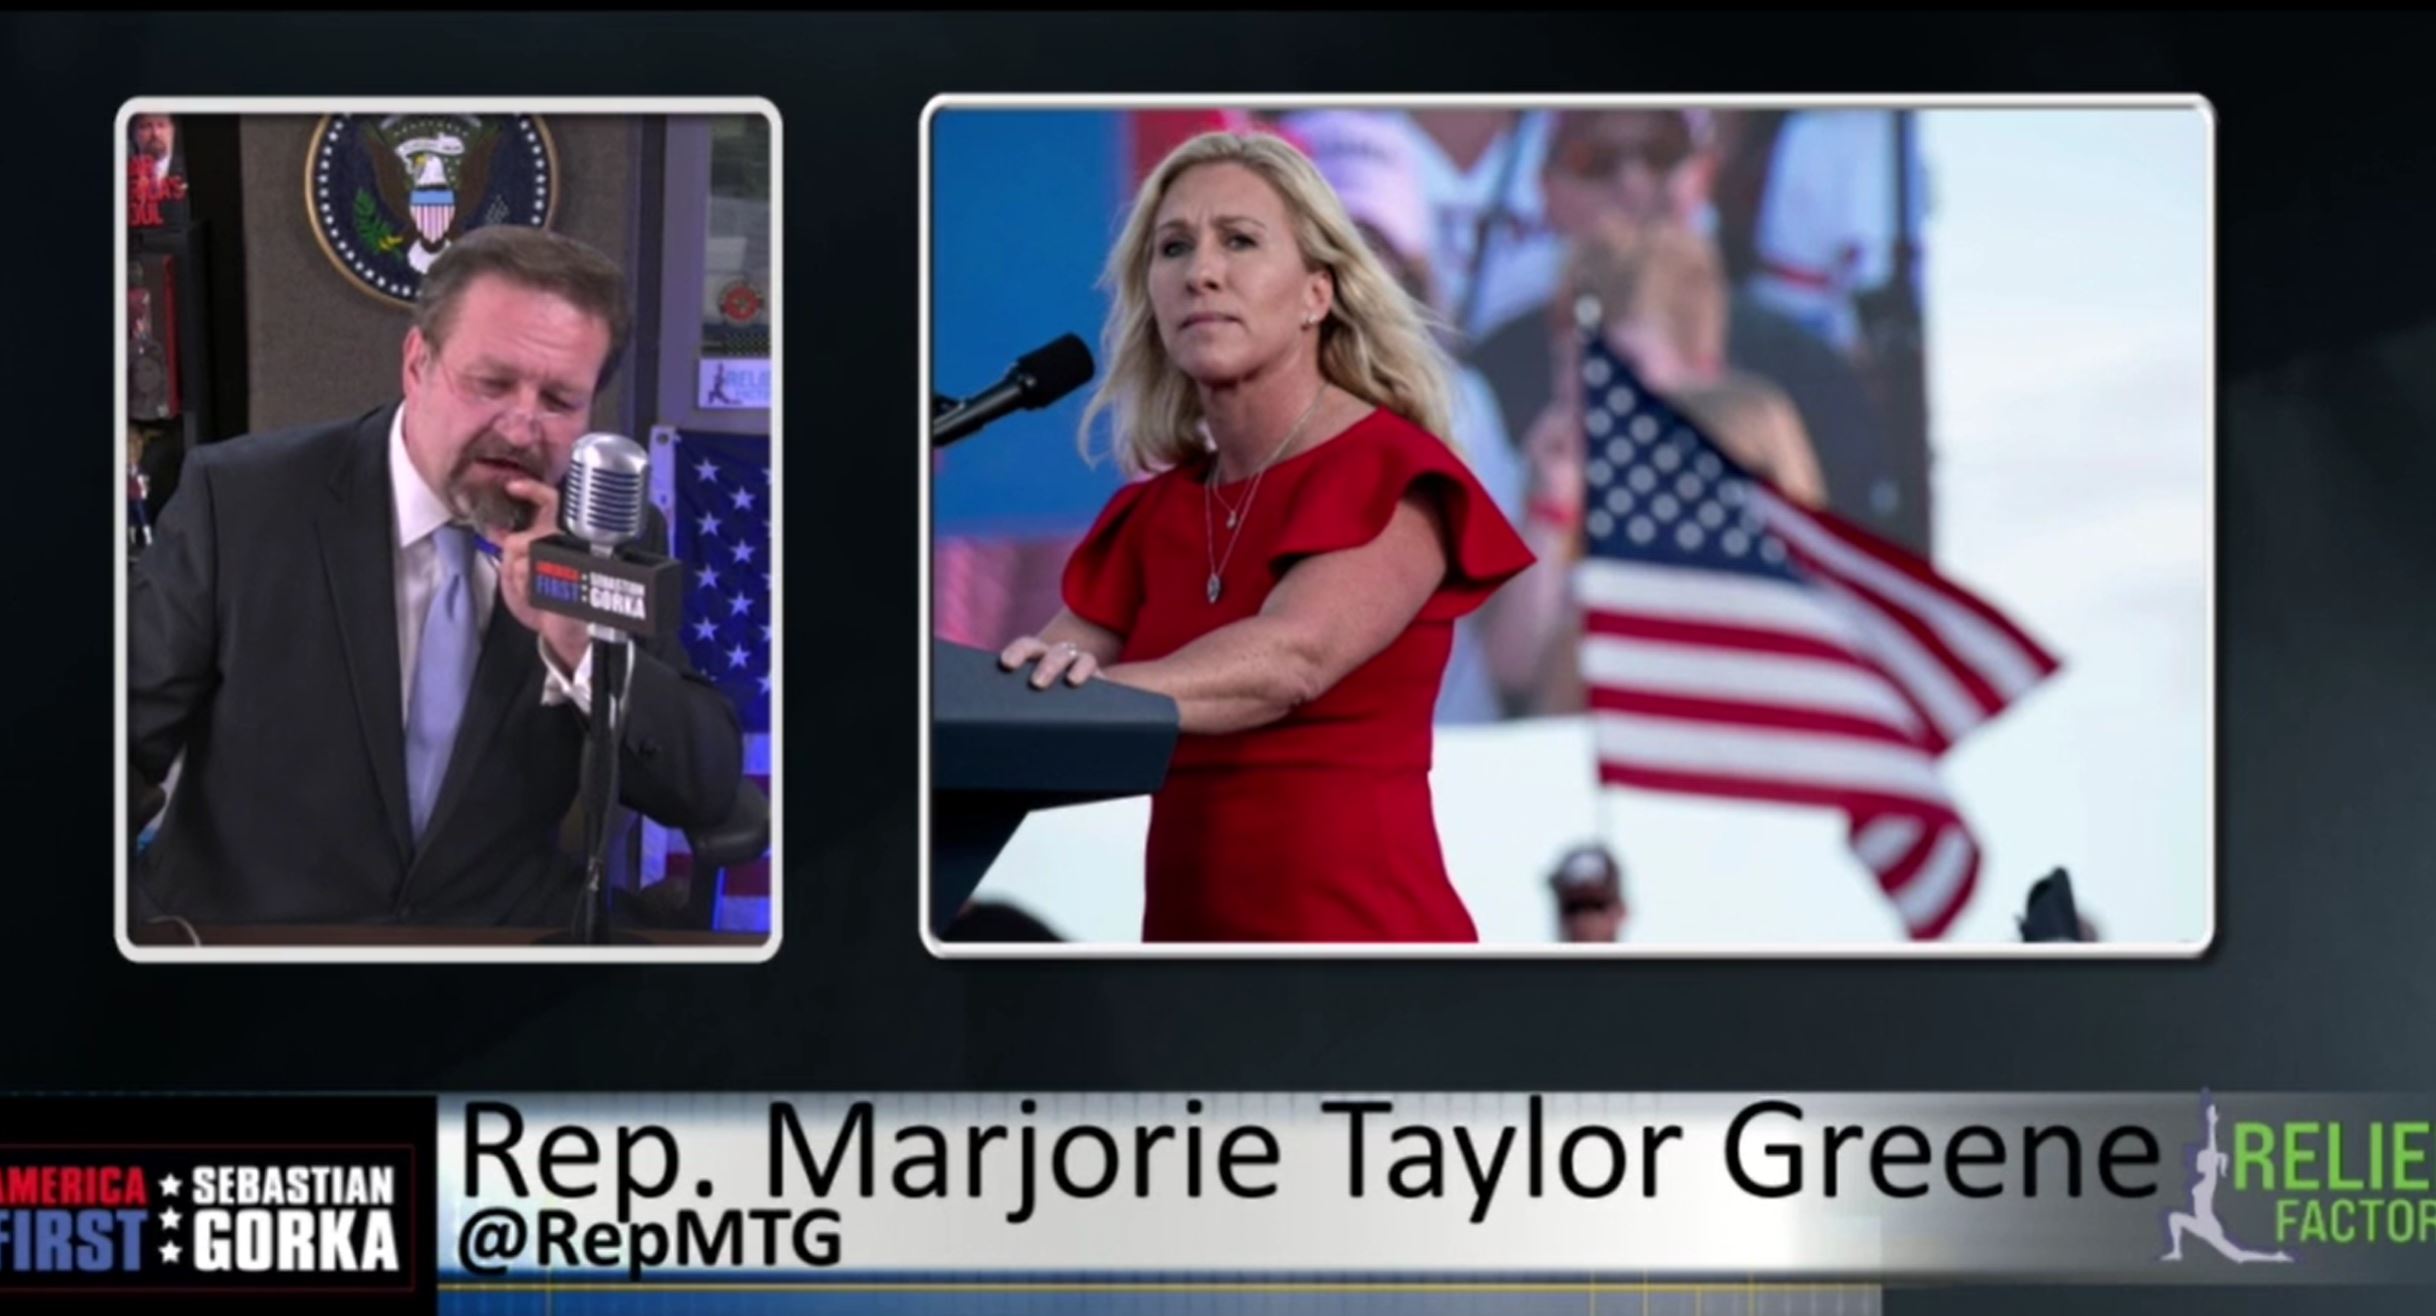 Marjorie Taylor Greene Again Pushes for ‘National Divorce,’ Praises ‘Second Amendment Rights’ As Means of Defense